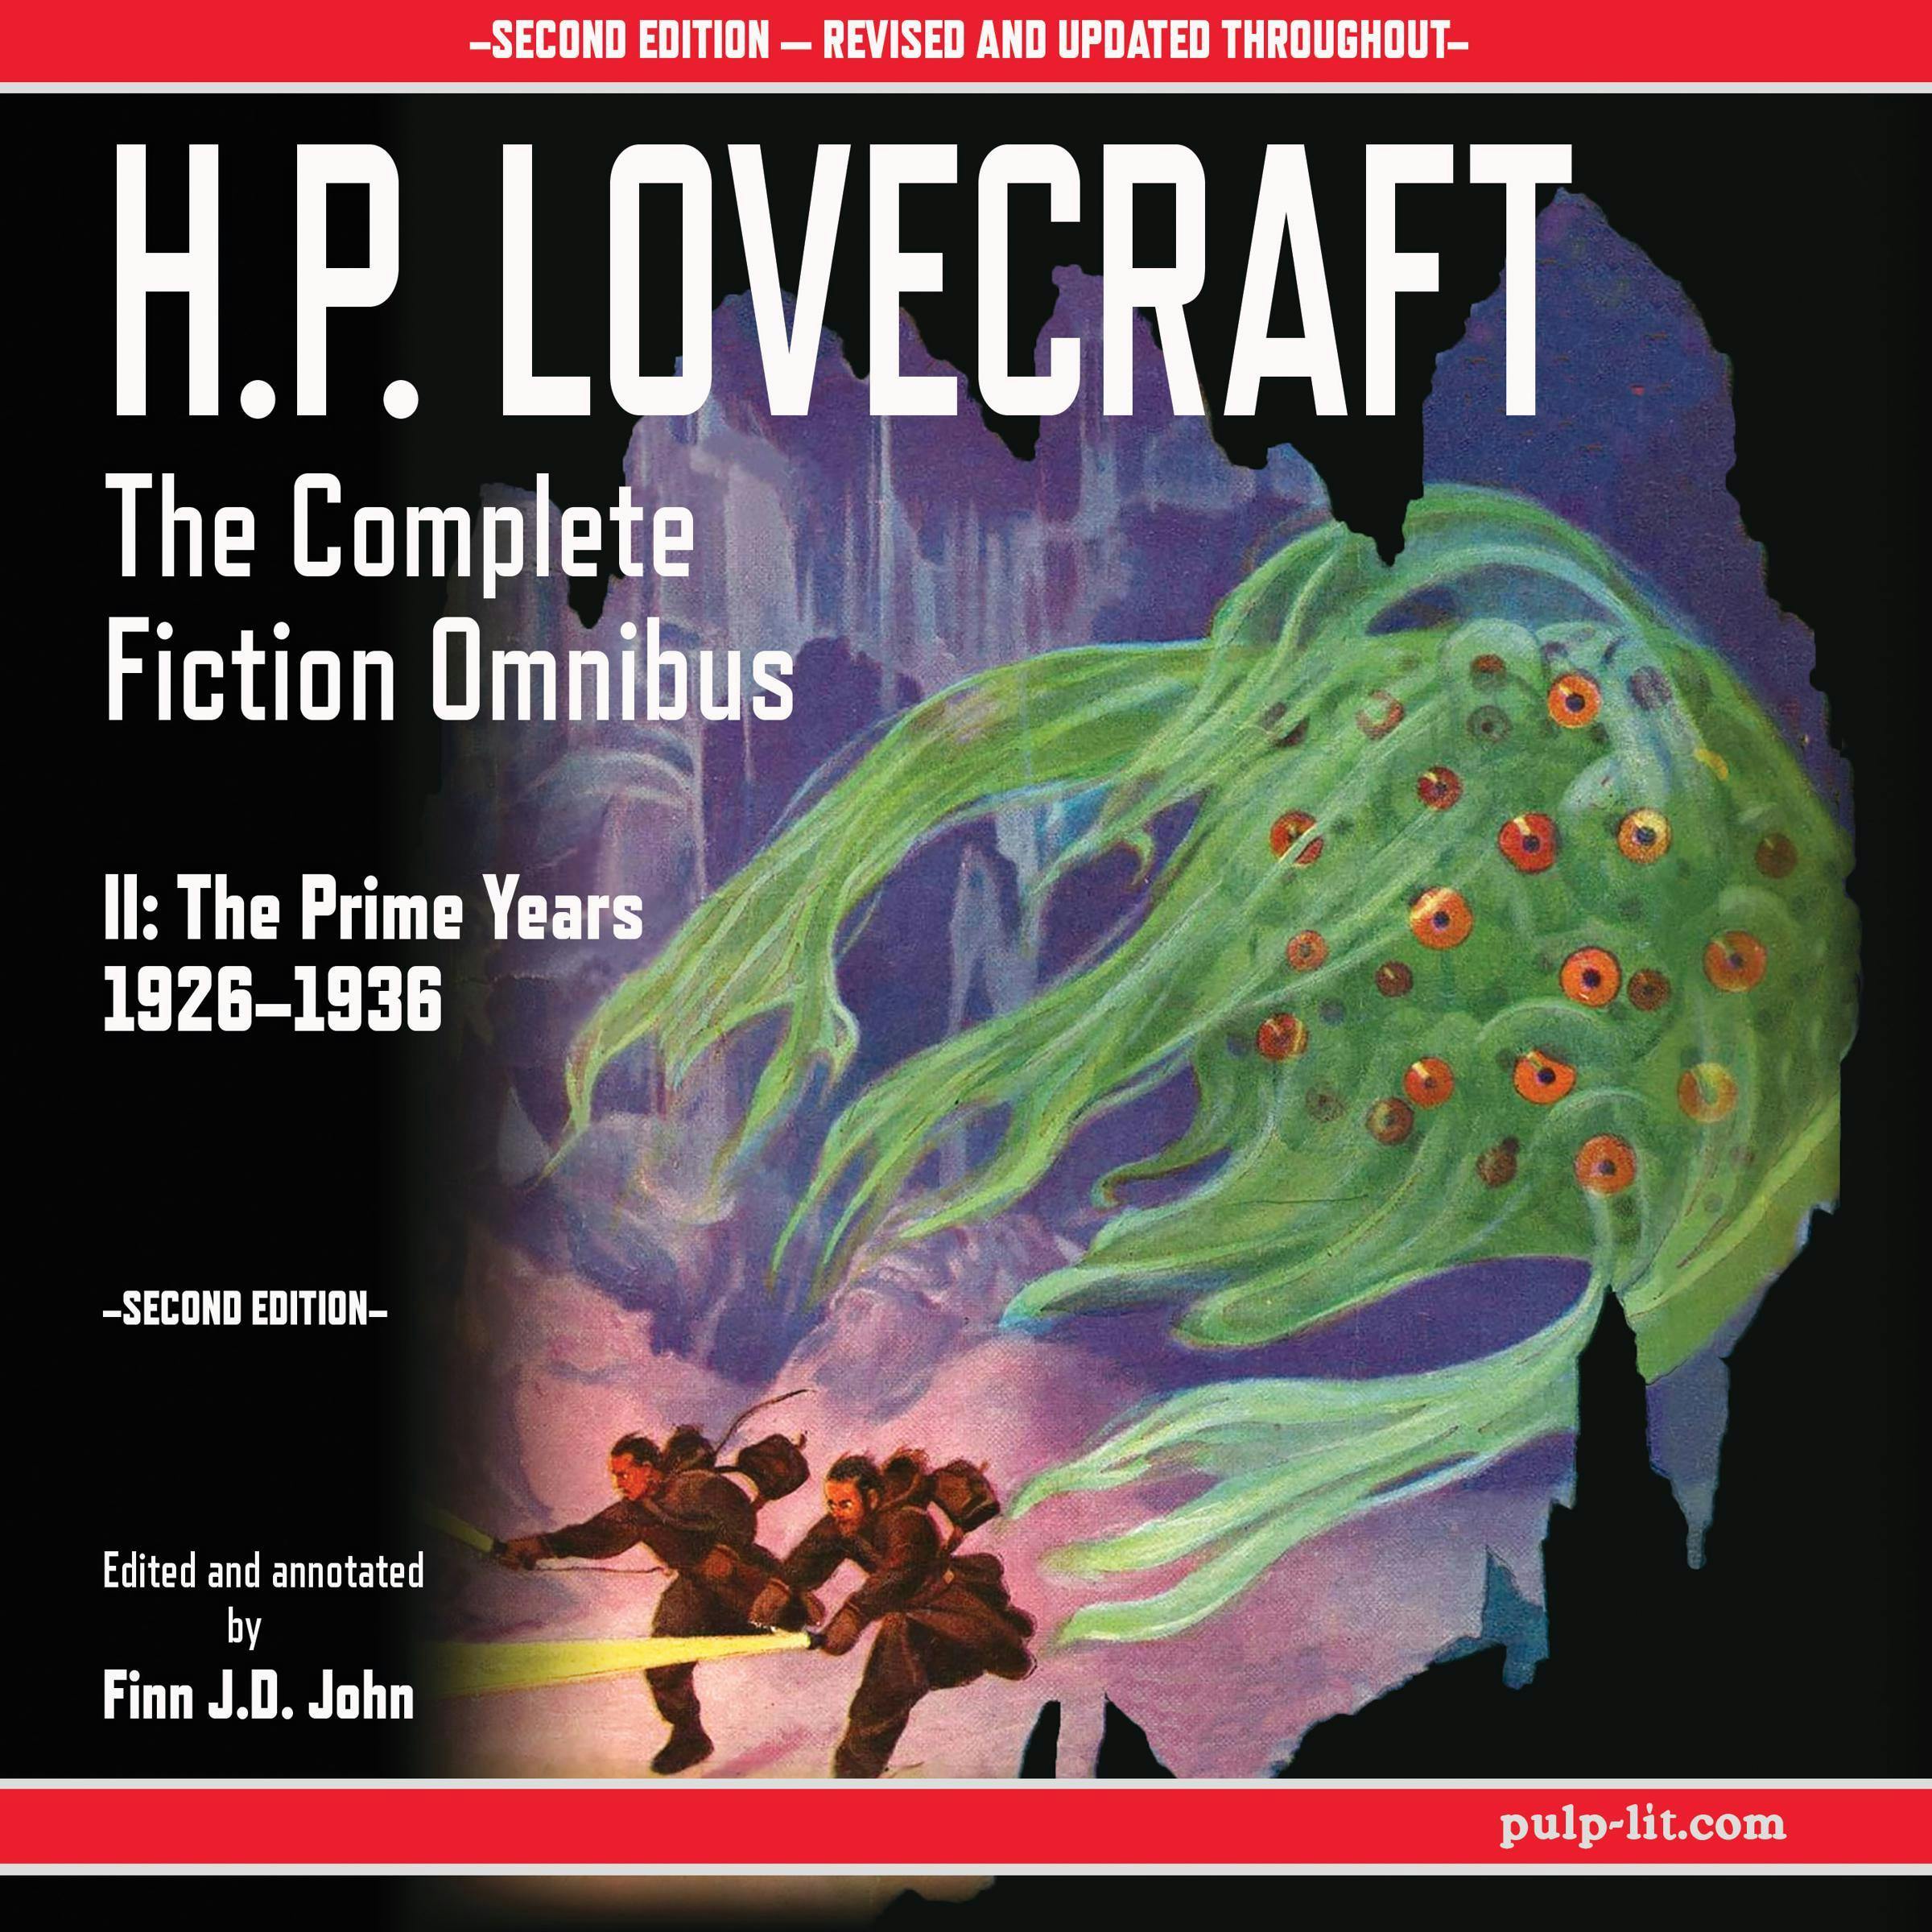 H.P. Lovecraft: The Complete Fiction Omnibus II: The Prime Years 1926-1936 - undefined